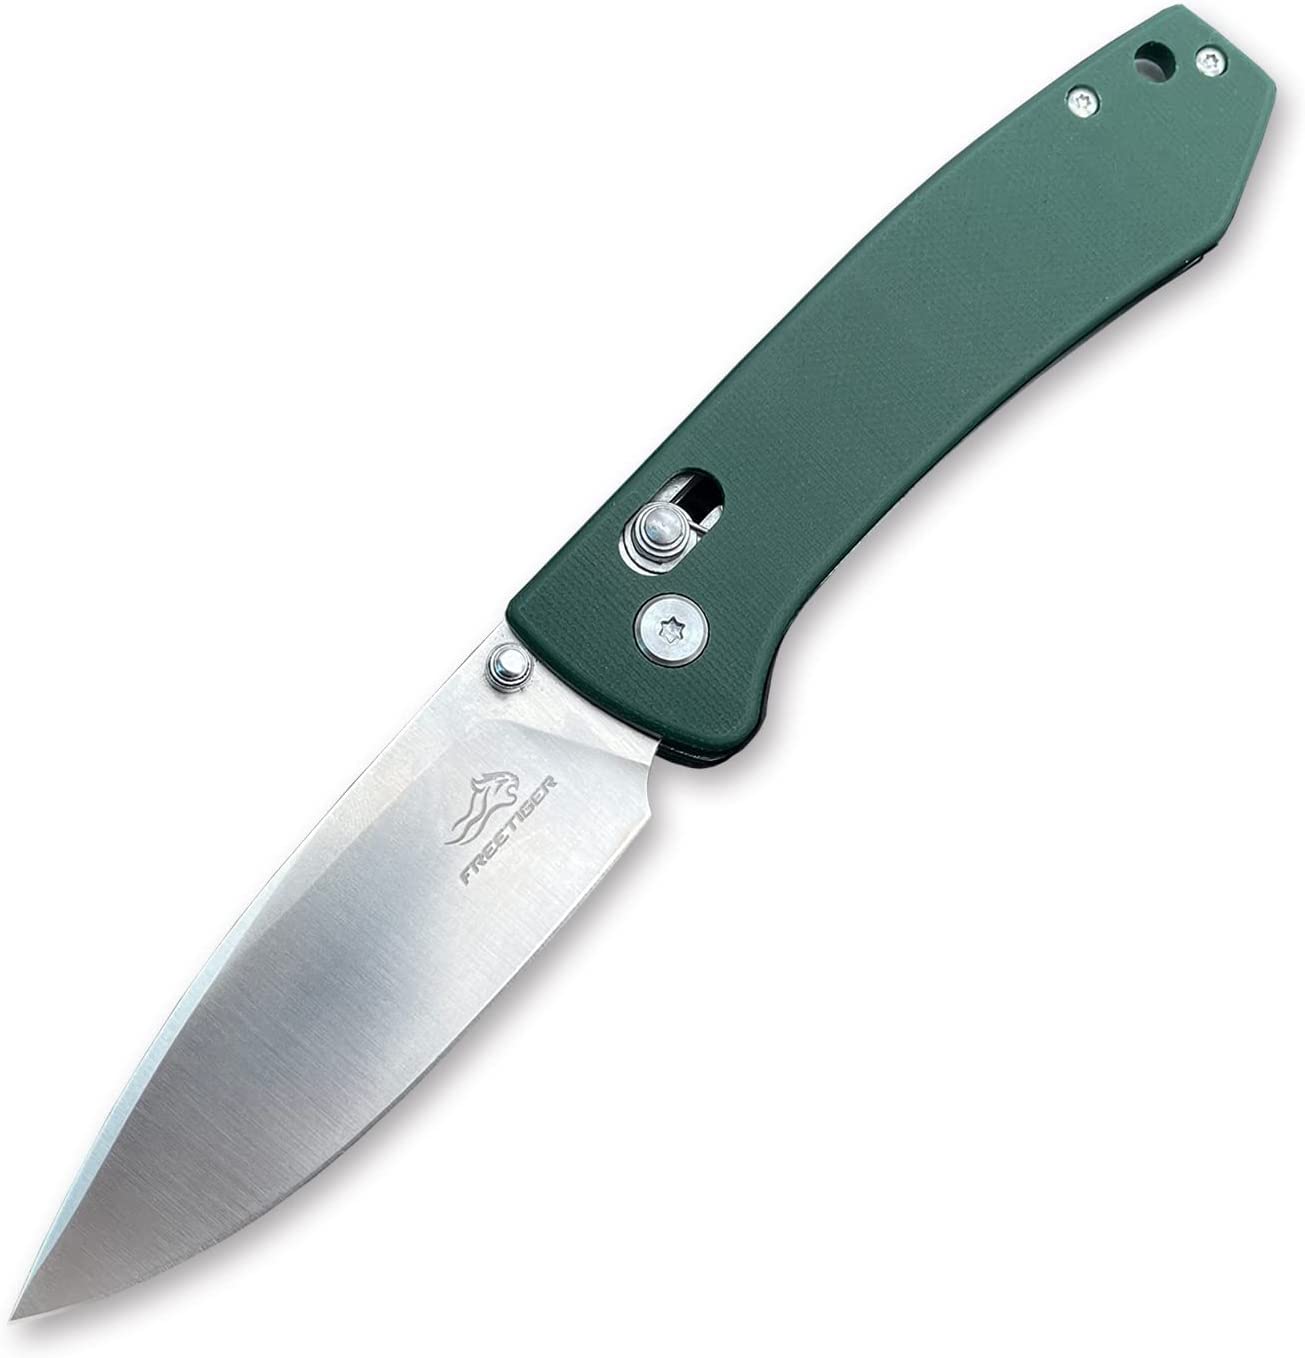 FreeTiger Foldable Pocket Knife(FT2103) D2 Steel 3.35 Inch Fine Edge Blade – Best Travel Accessories Gear Safety Axis Lock Folding Knives – Gifts for Men Dad Husband (Green)